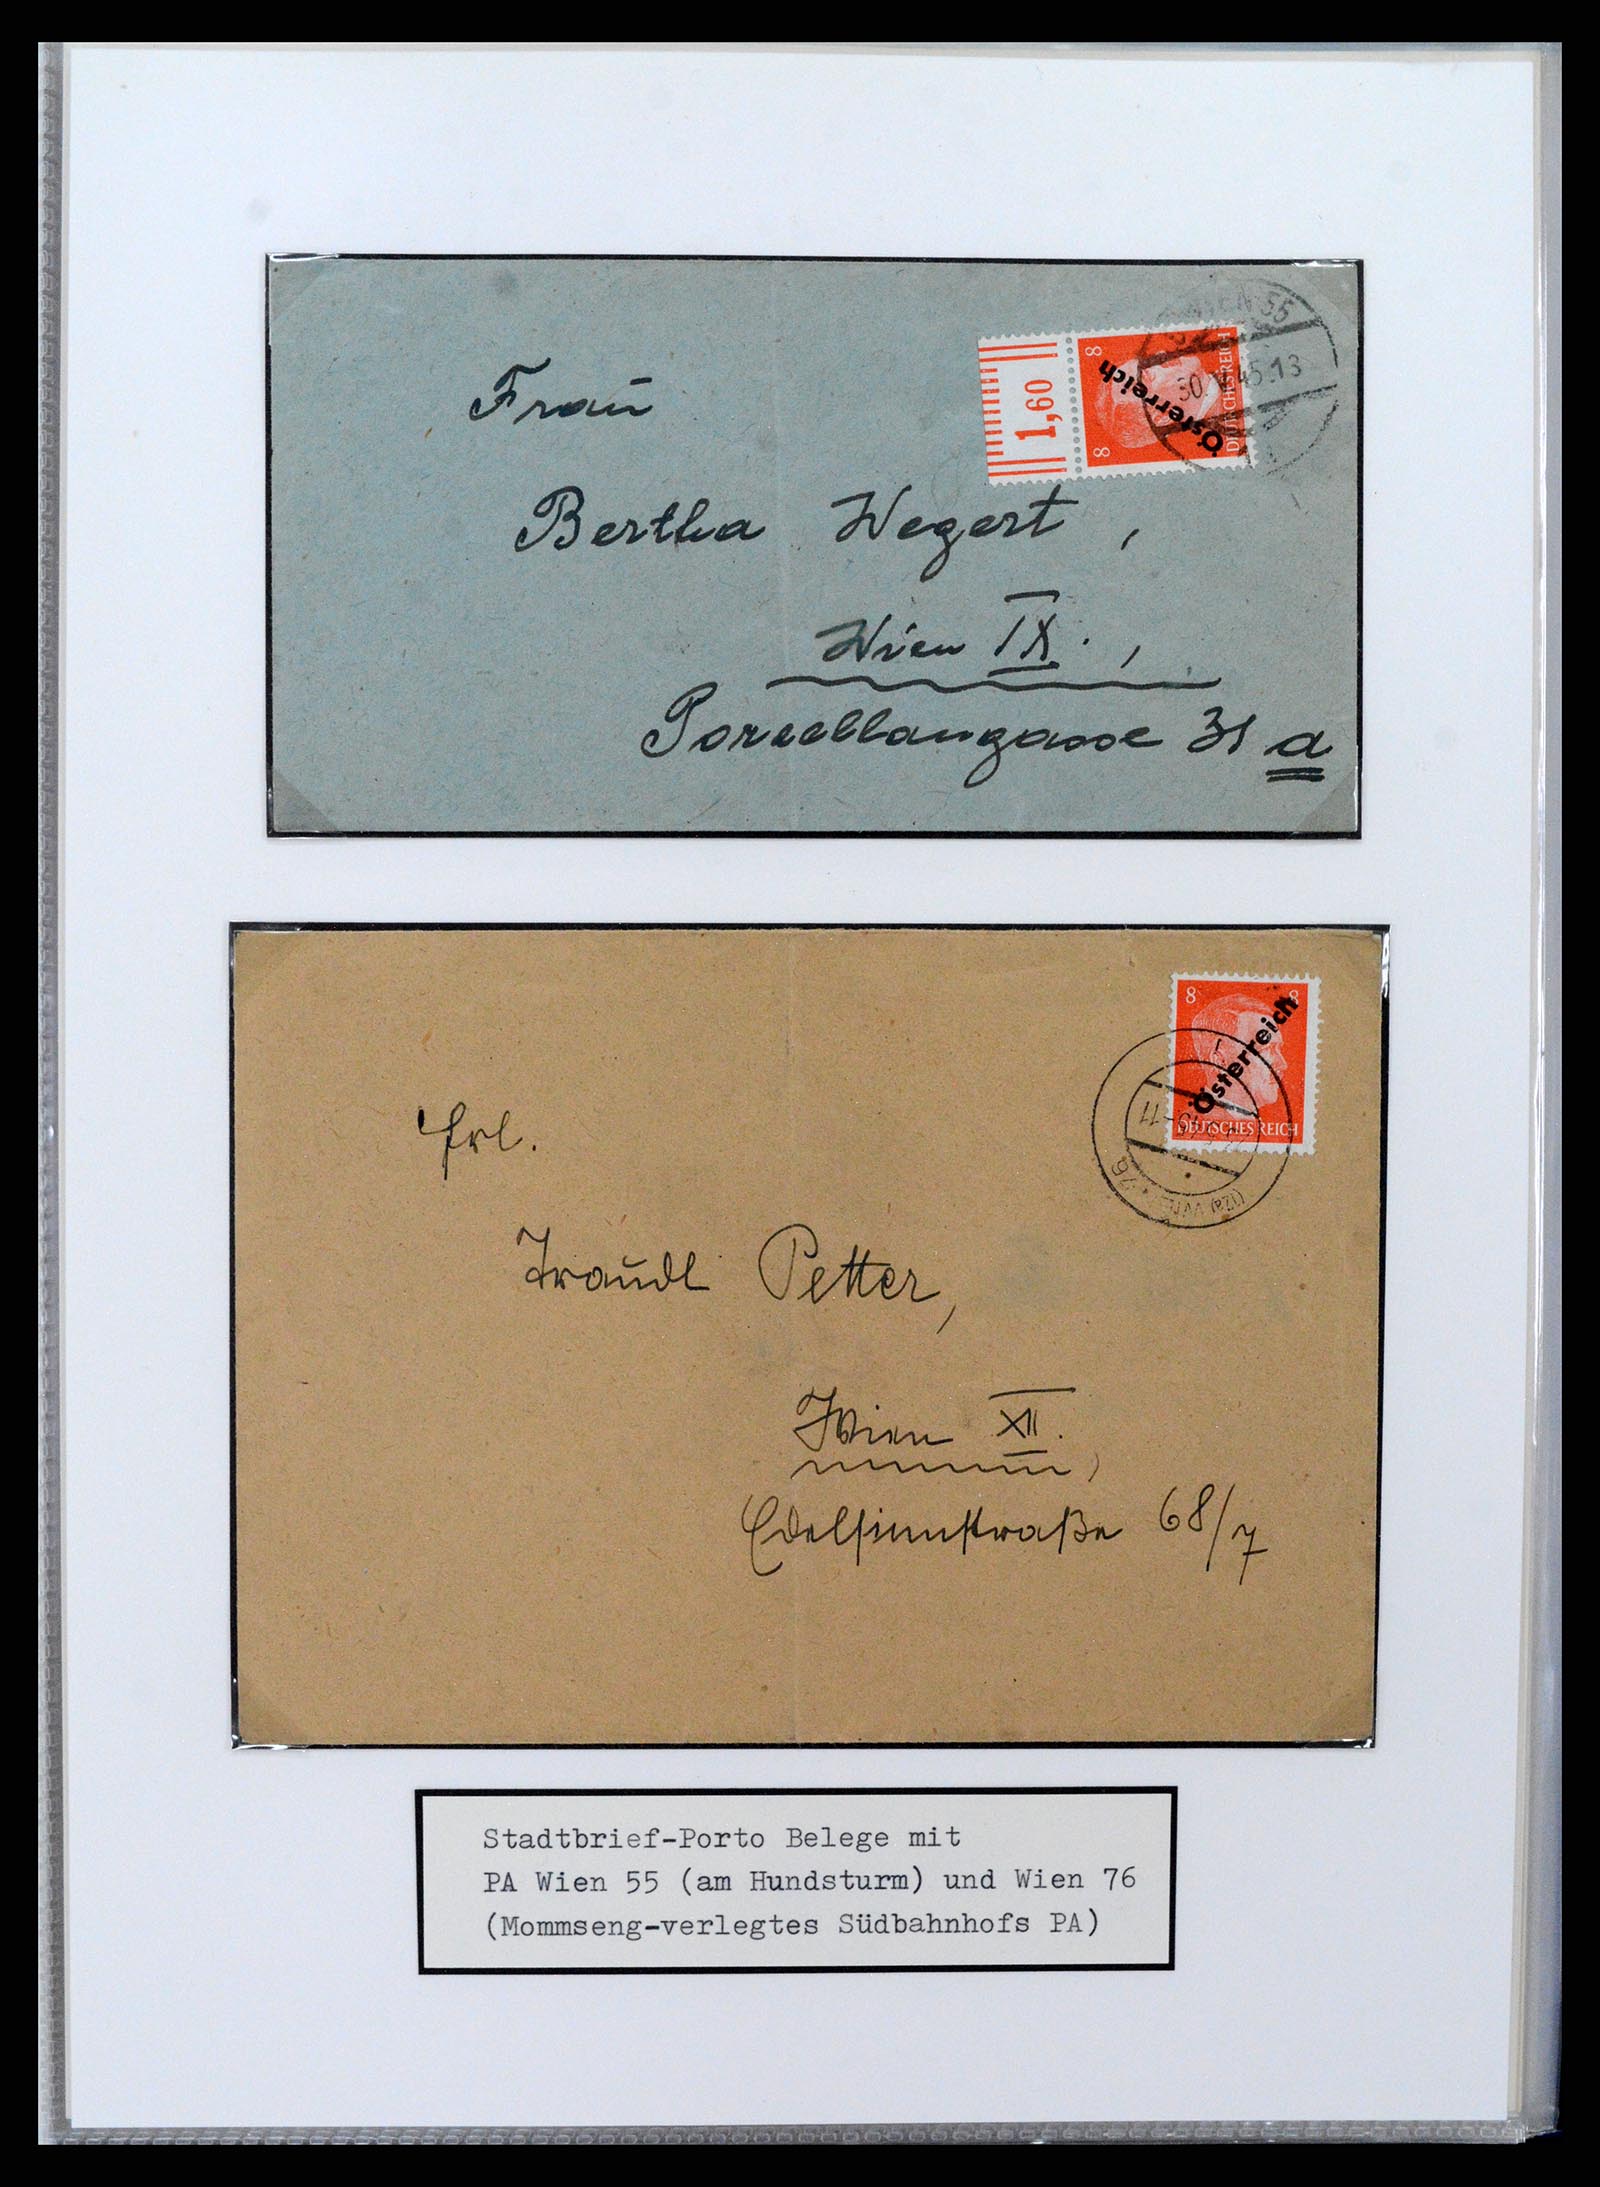 37390 014 - Stamp collection 37390 Austria local overprints 1945.